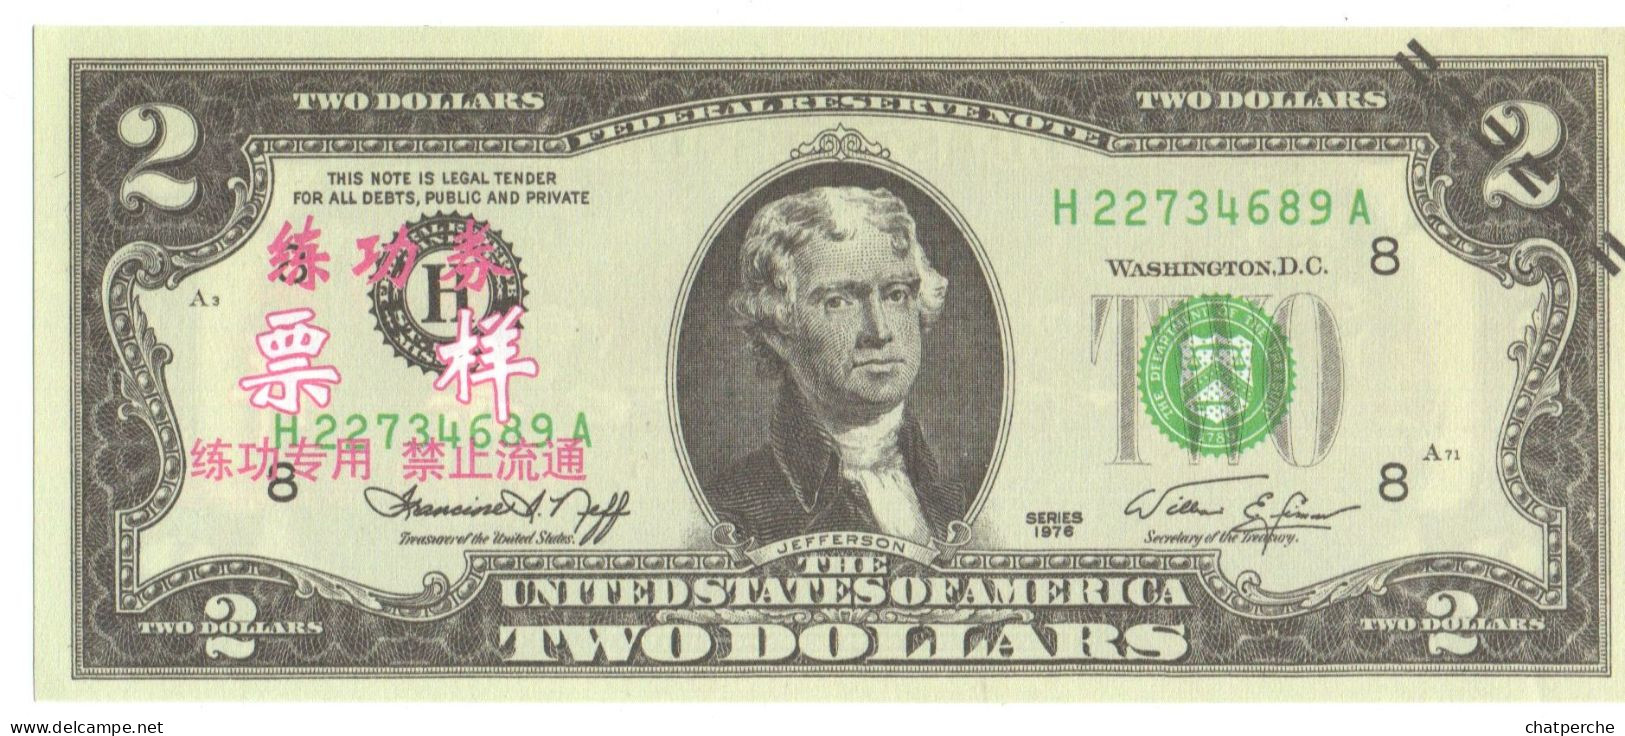 POUR COLLECTIONNEUR FAUX-BILLET FAKE 2 TWO DOLLARS THOMAS JEFFERSON USA THE UNITED STATES OF AMERICA - Fouten